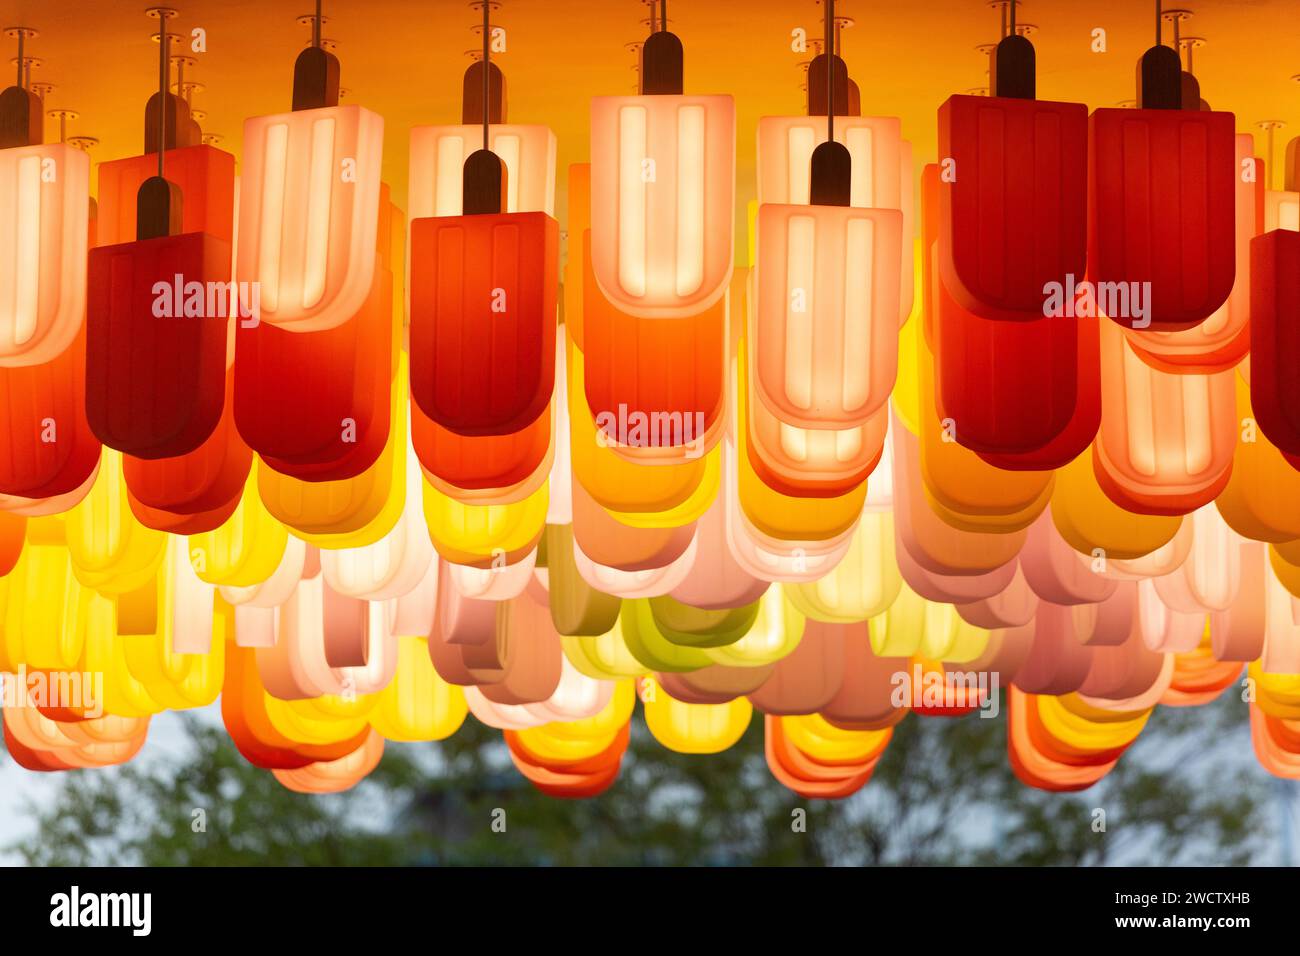 Popsicle hang upside down but is a lighting fixture display decoration to draw the customers for business. Resort World Sentosa, Singapore. Stock Photo